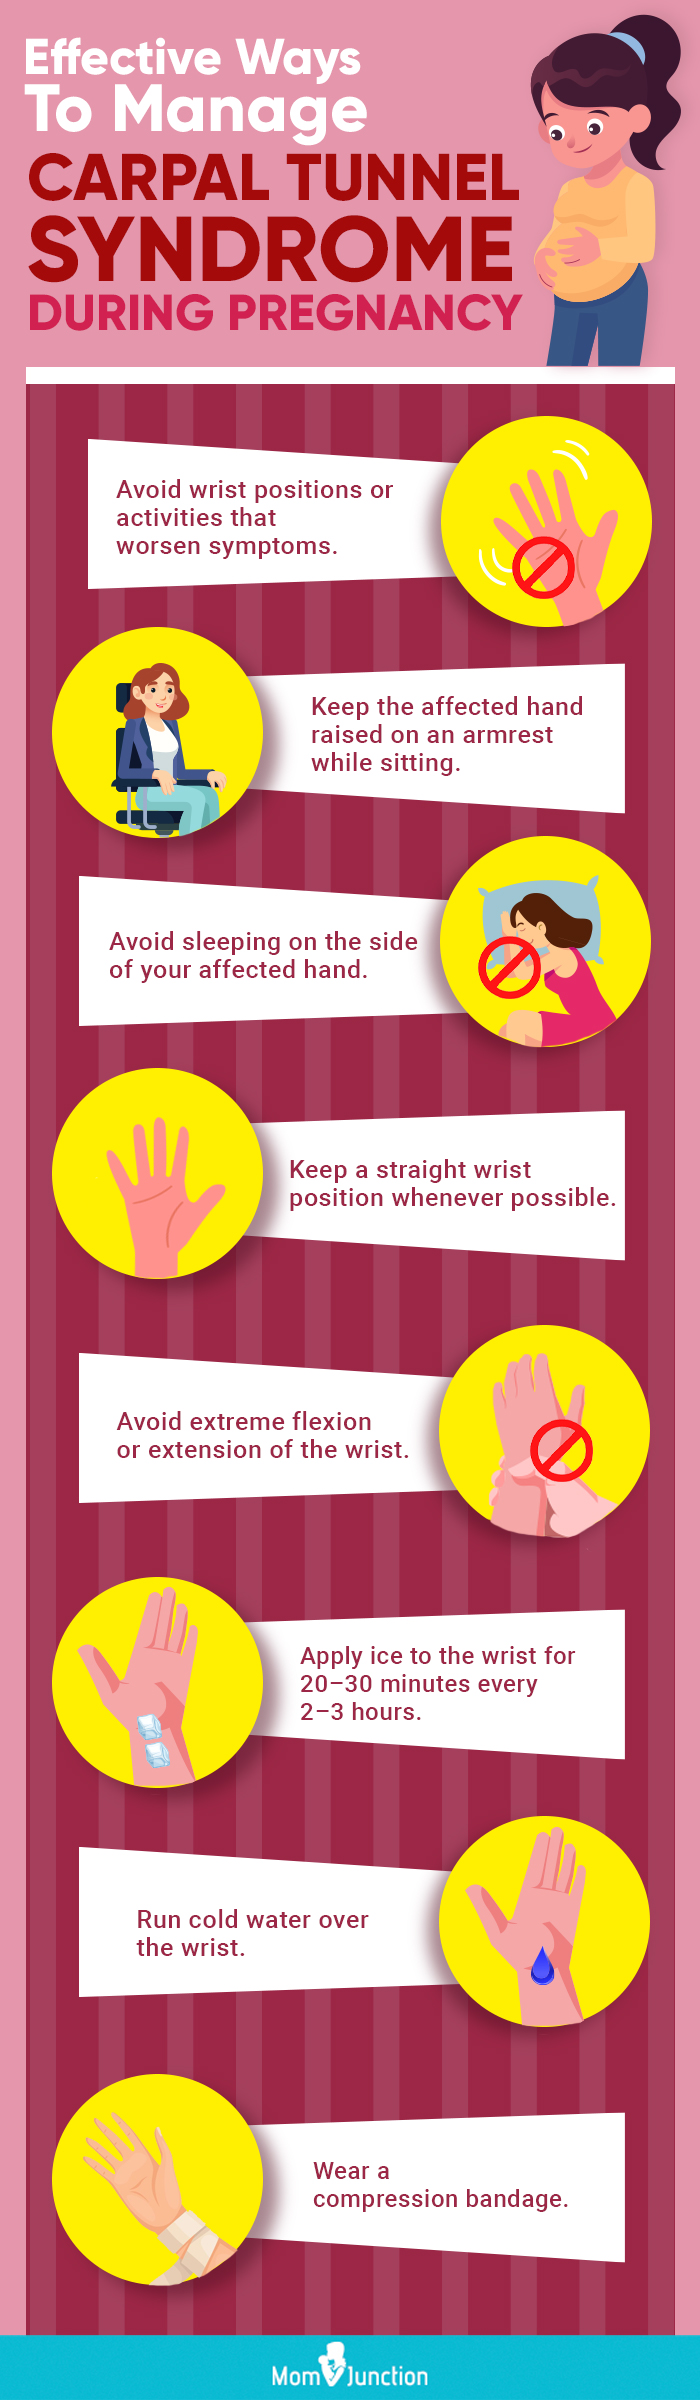 effective ways to manage carpal tunnel syndrome during pregnancy (infographic)